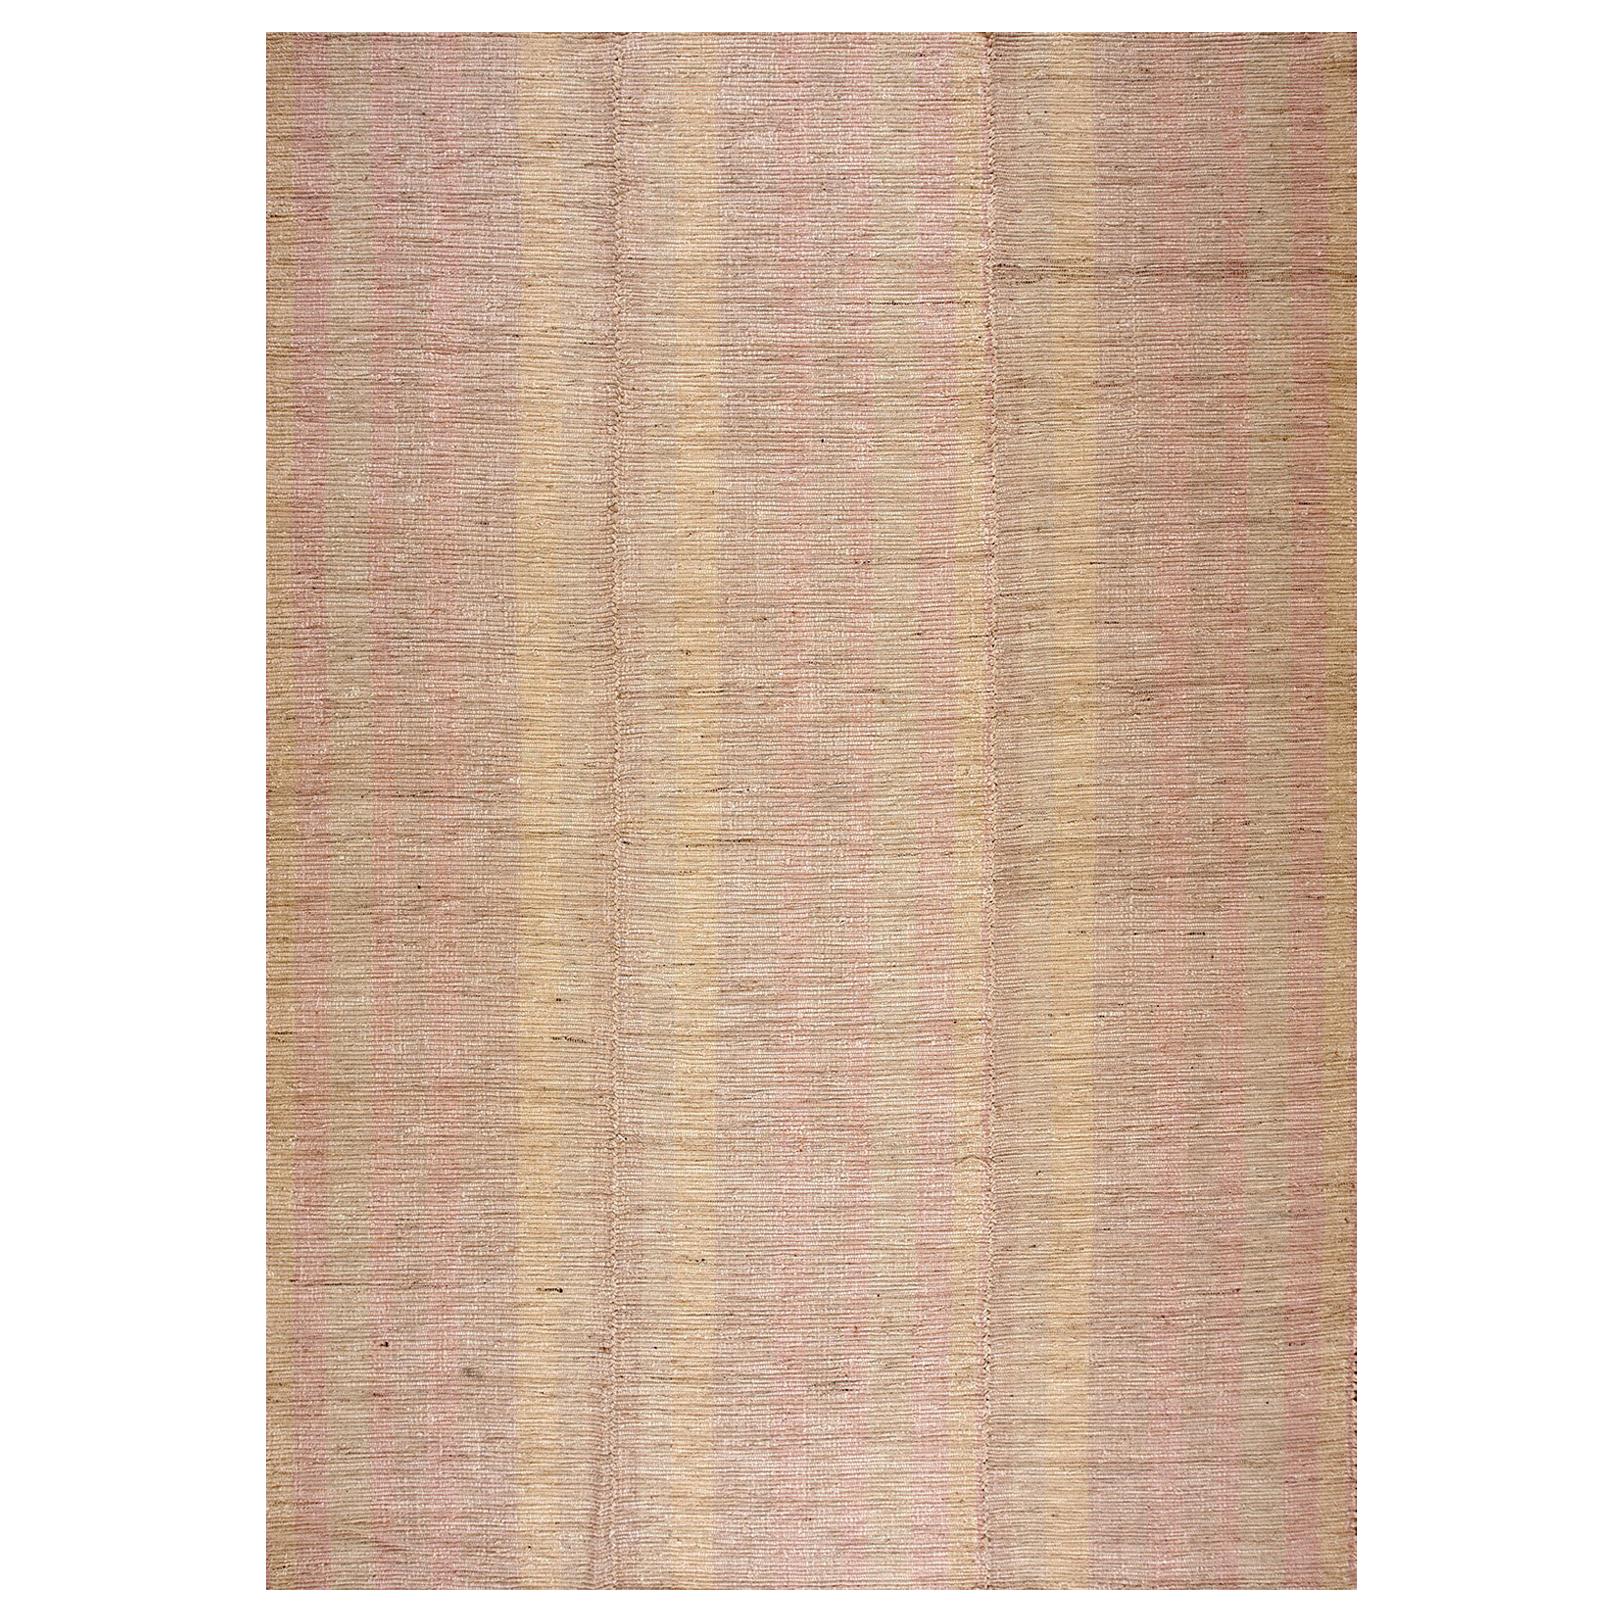 Contemporary Handwoven Wool Shaker Style Flat Weave Carpet 9' 3" x 13' 0"